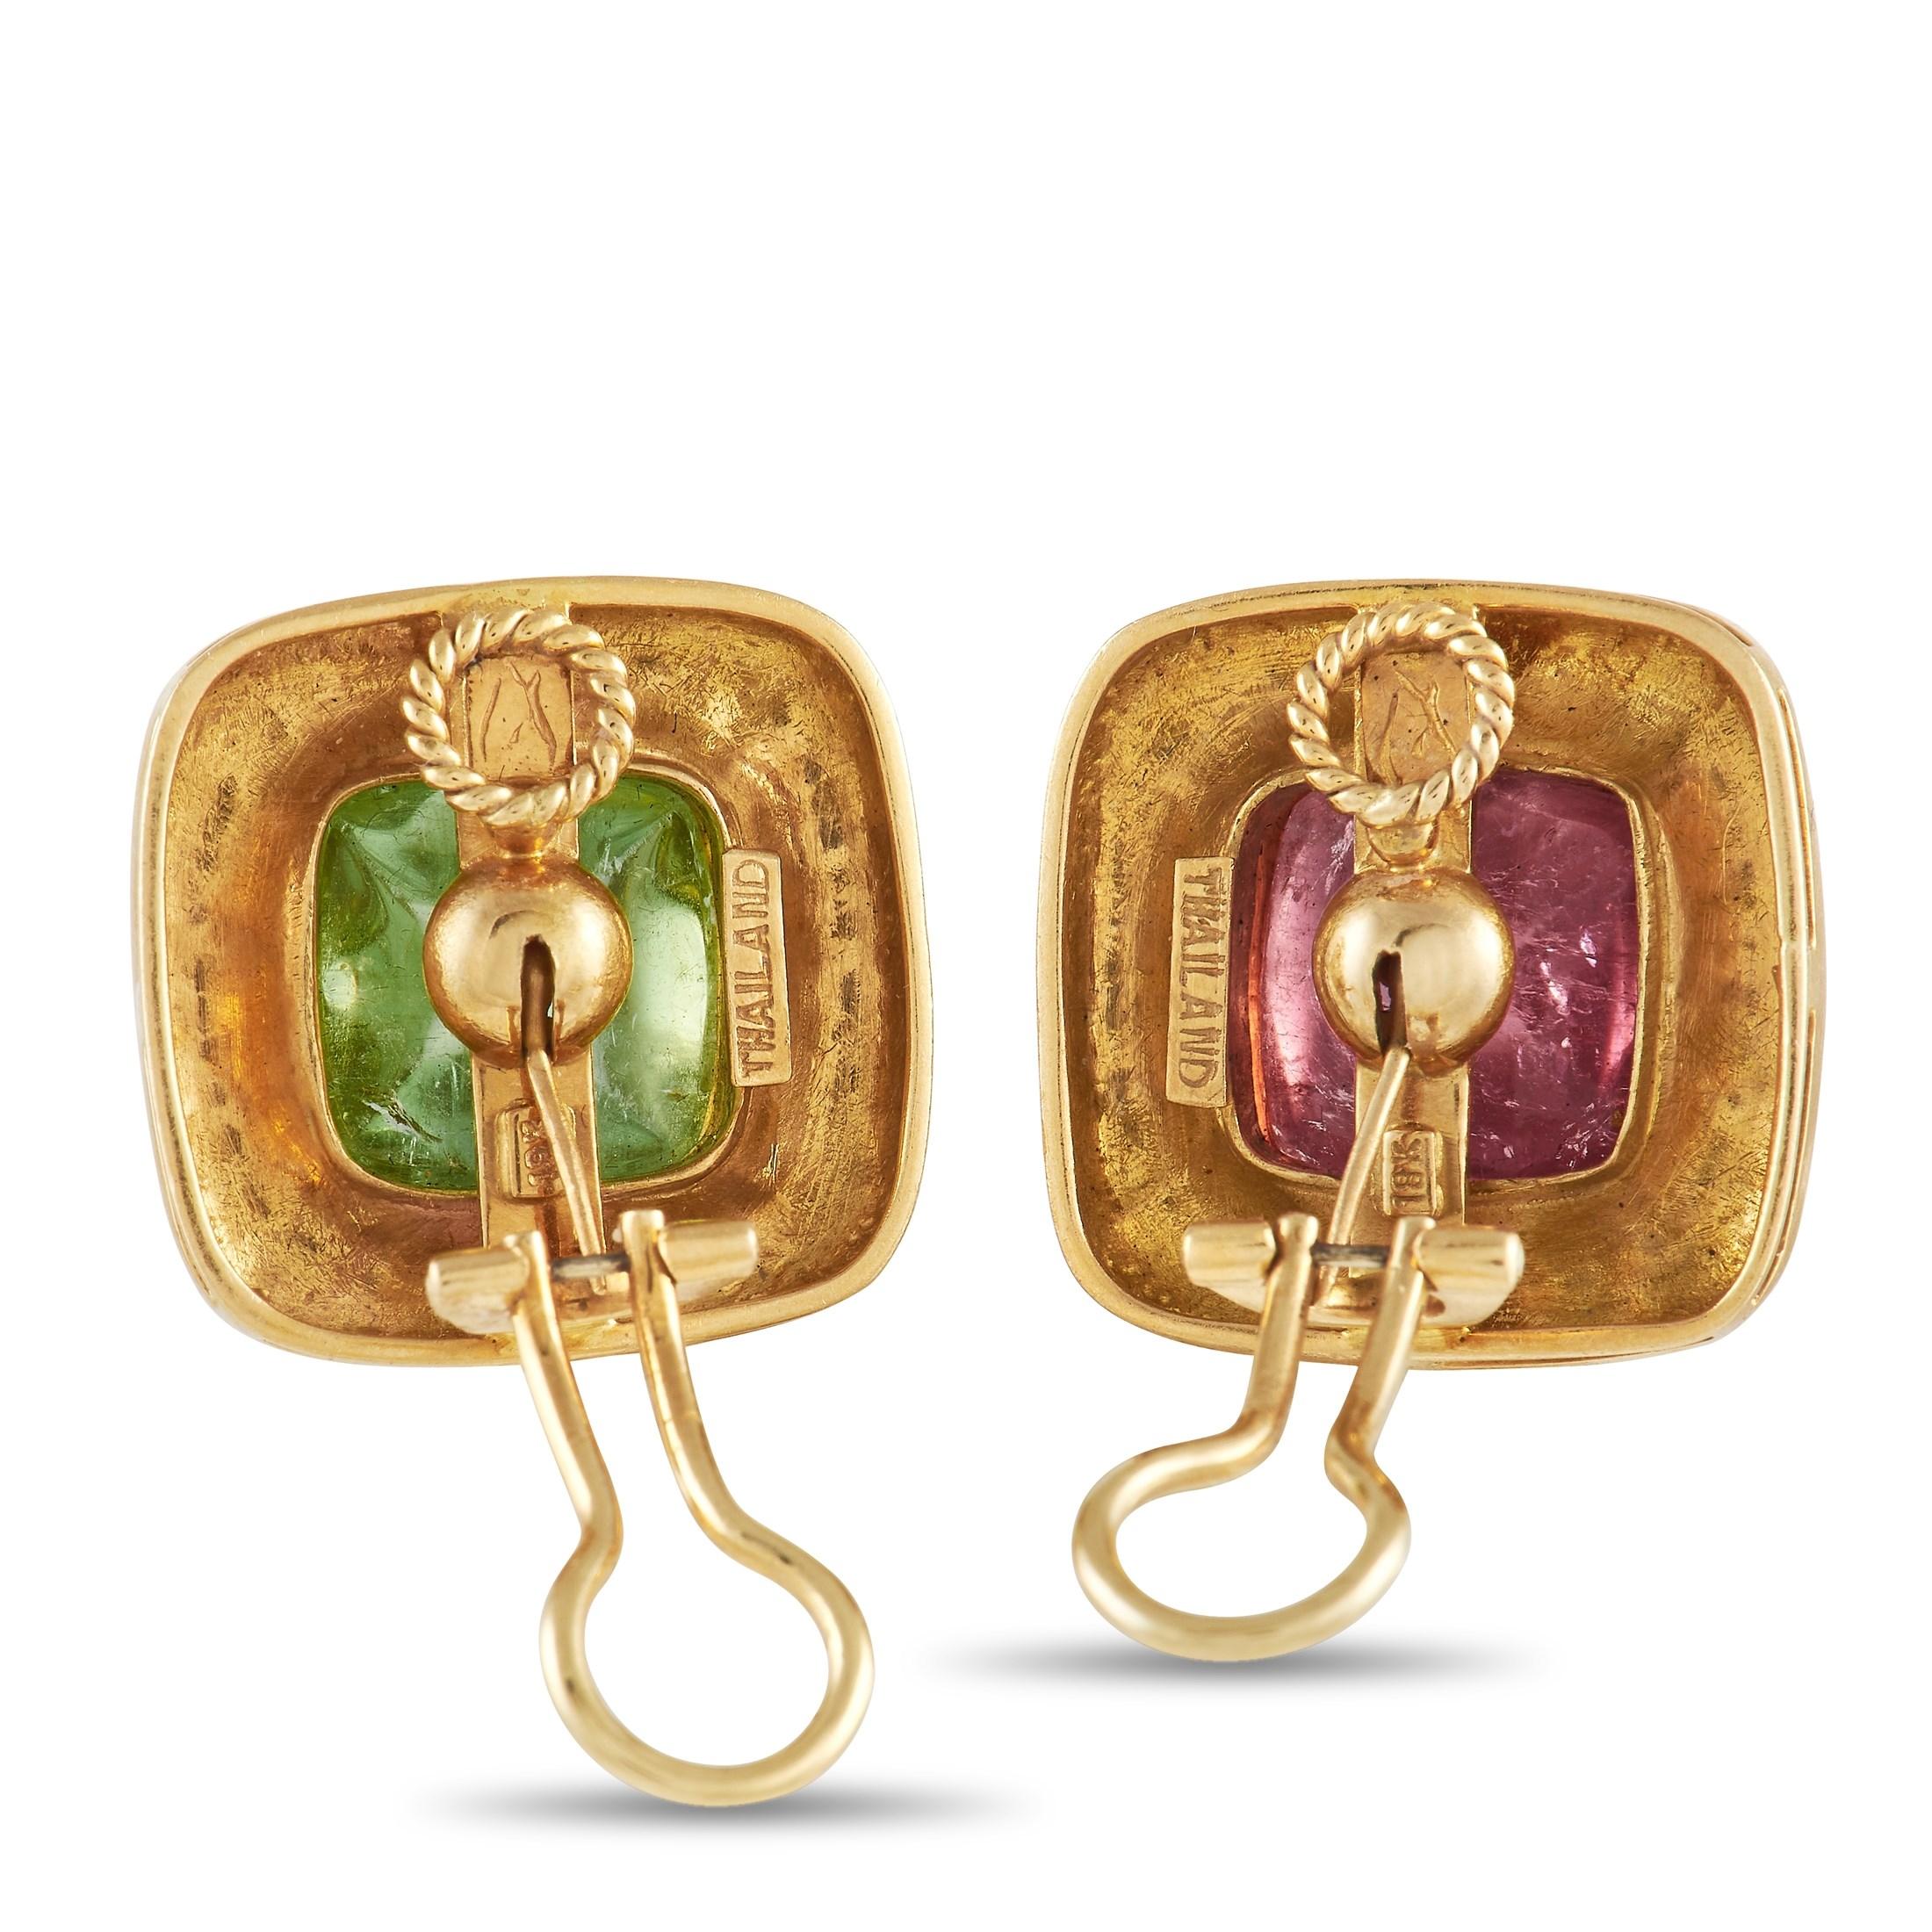 There’s something incredibly elegant about these earrings from Elizabeth Locke. Each one features a rounded 18K Yellow Gold setting that measures 0.95” square. At their centers, a single Tourmaline stone and a single Peridot stone give them a